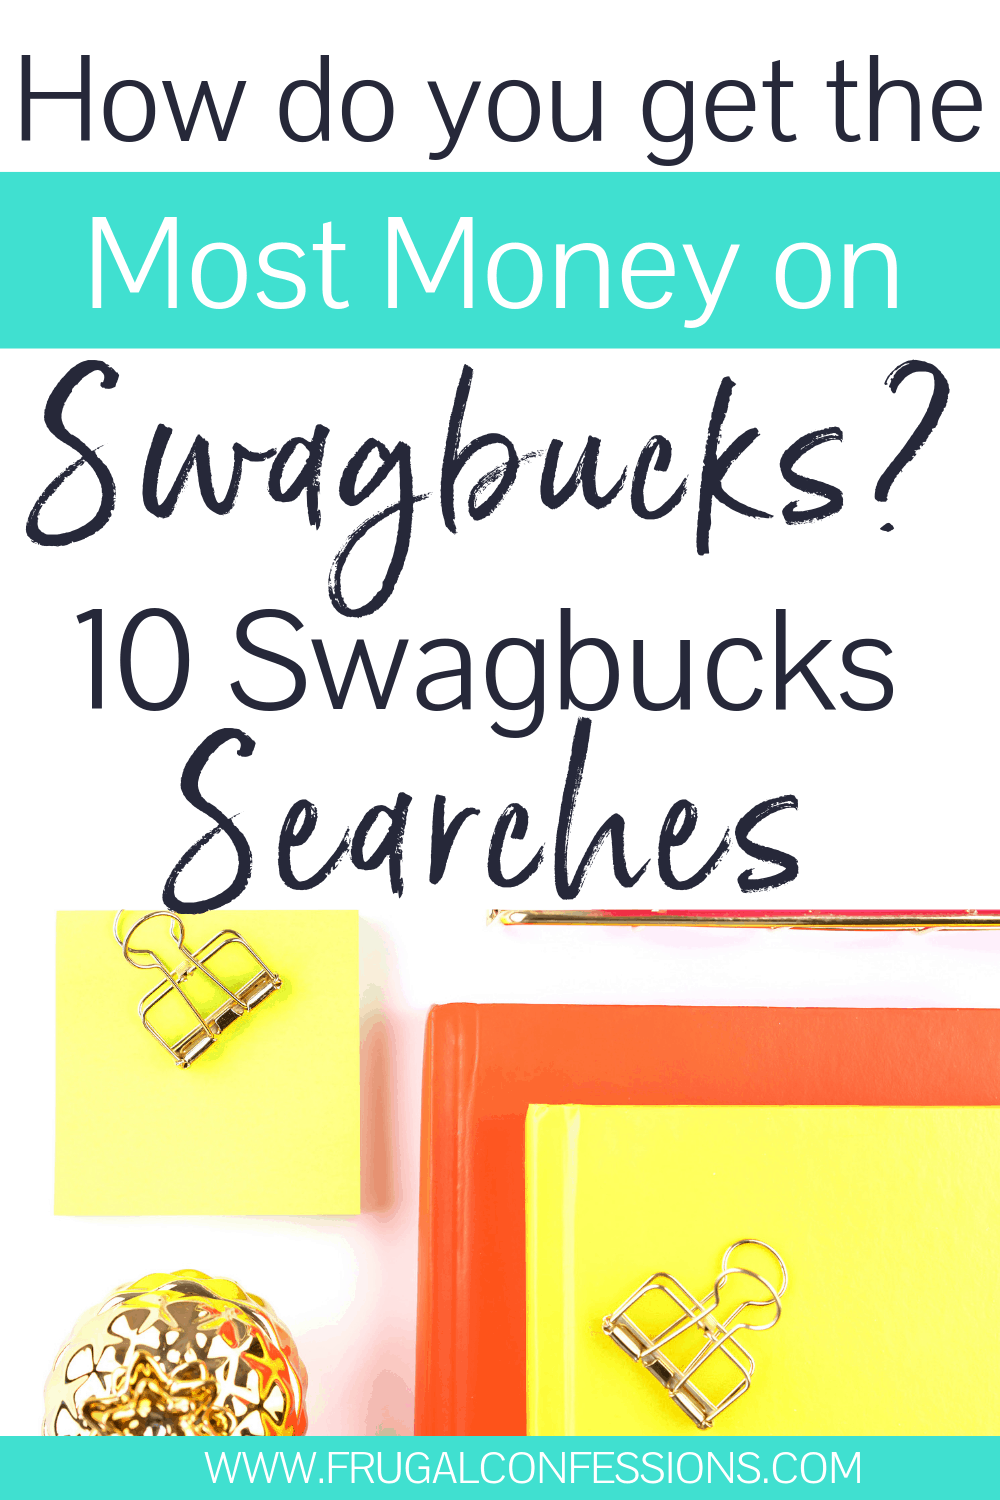 desk flatlay with bright orange and yellow folders, text overlay "how do you get the most money on swagbucks? 10 swagbucks searches"